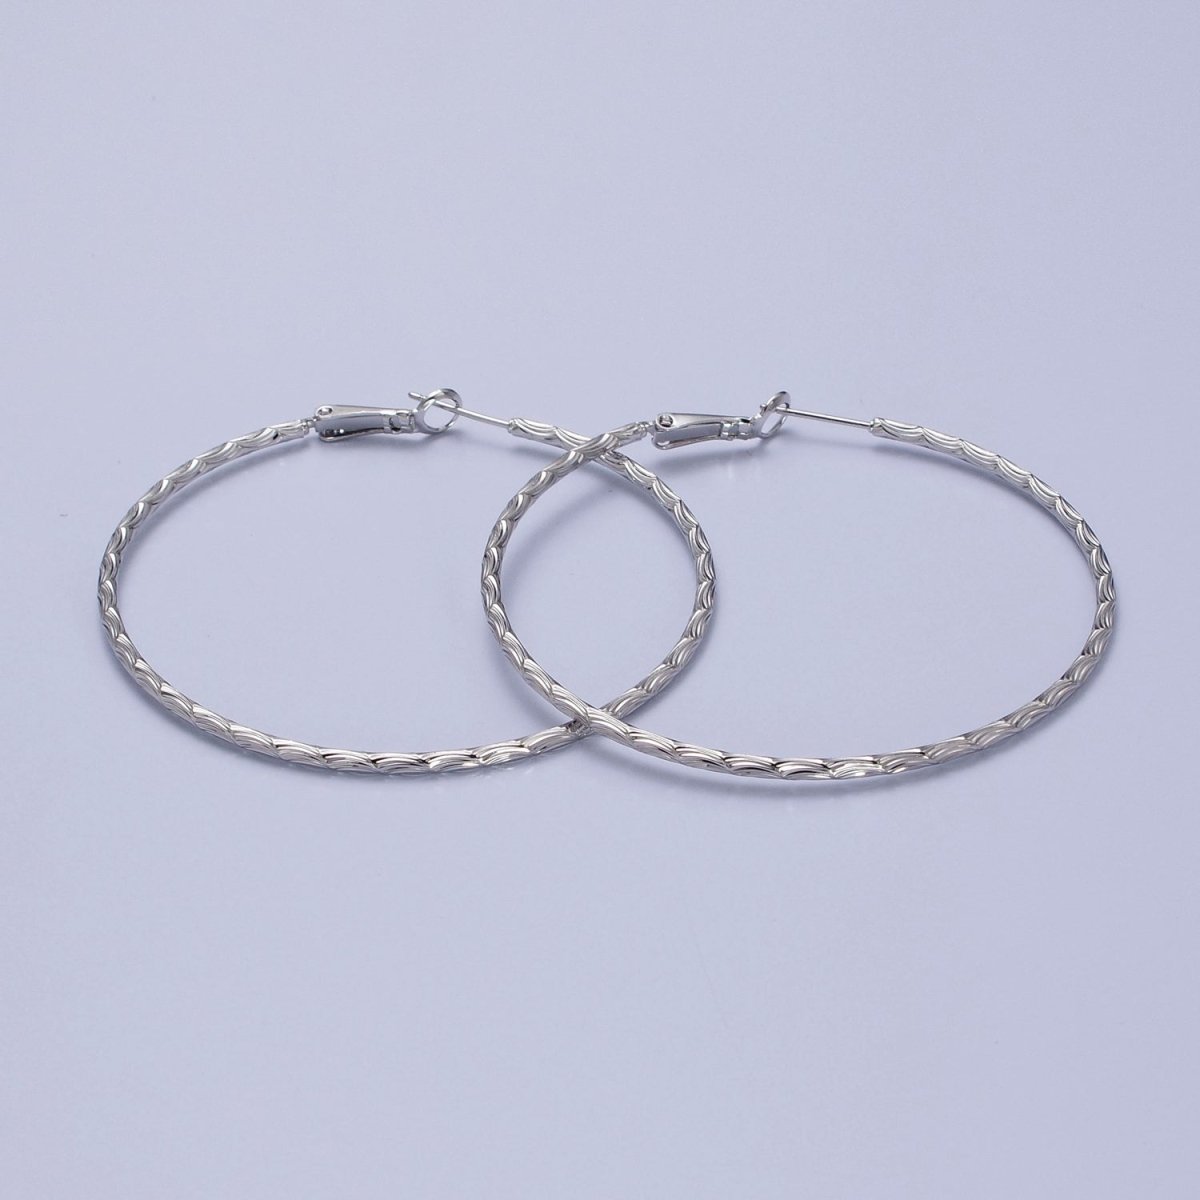 50mm, 60mm Curved Lined Textured Hinge-Hoop Earrings in Gold & Silver | AB745, AB445 - DLUXCA